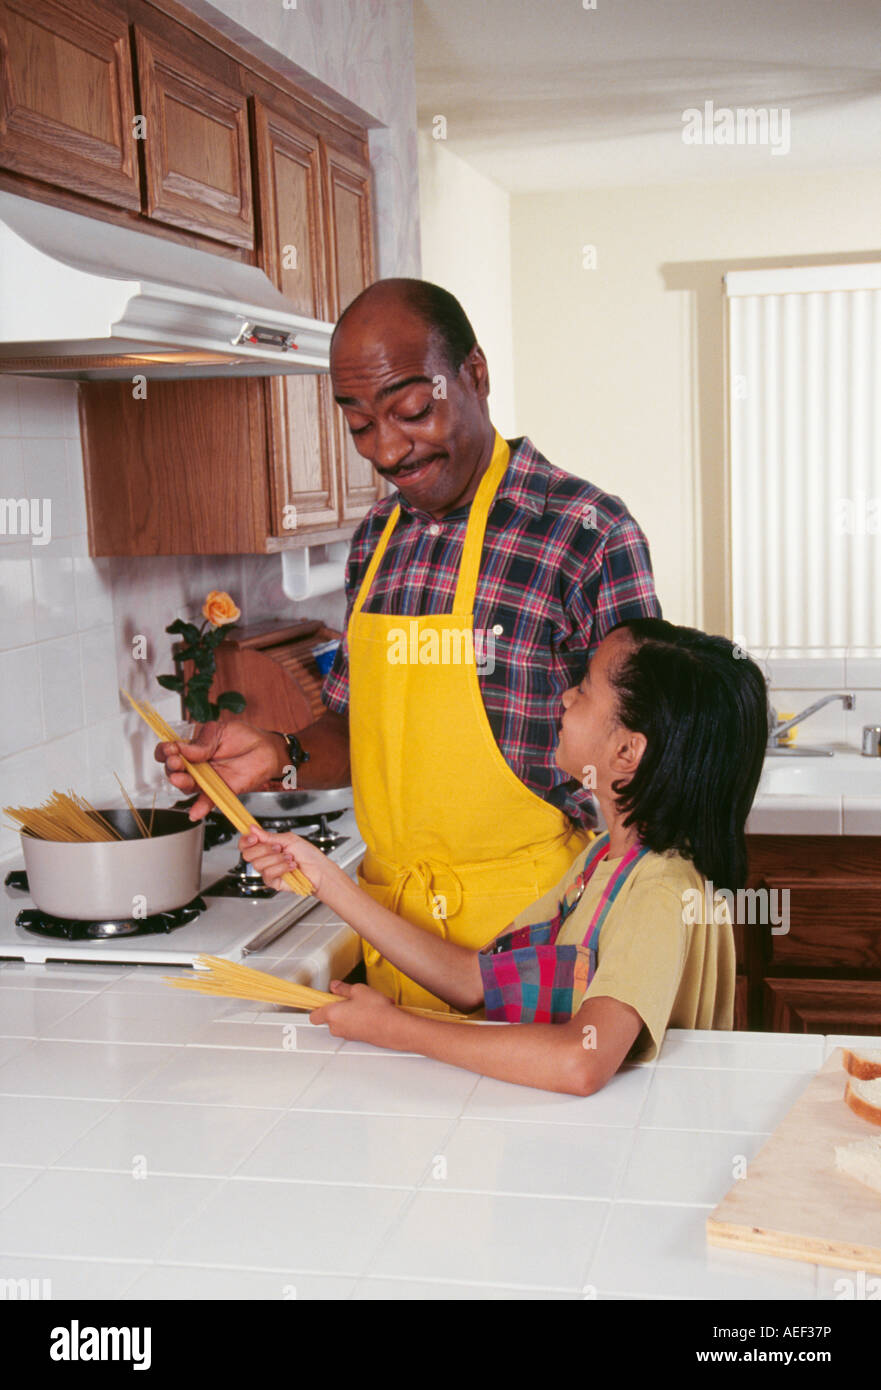 Dad and daughter working in 7-9 year old preparing pasta spaghetti dinner meal kitchen diverse diversity looking at each other smiling smile smiles POV  MR Stock Photo